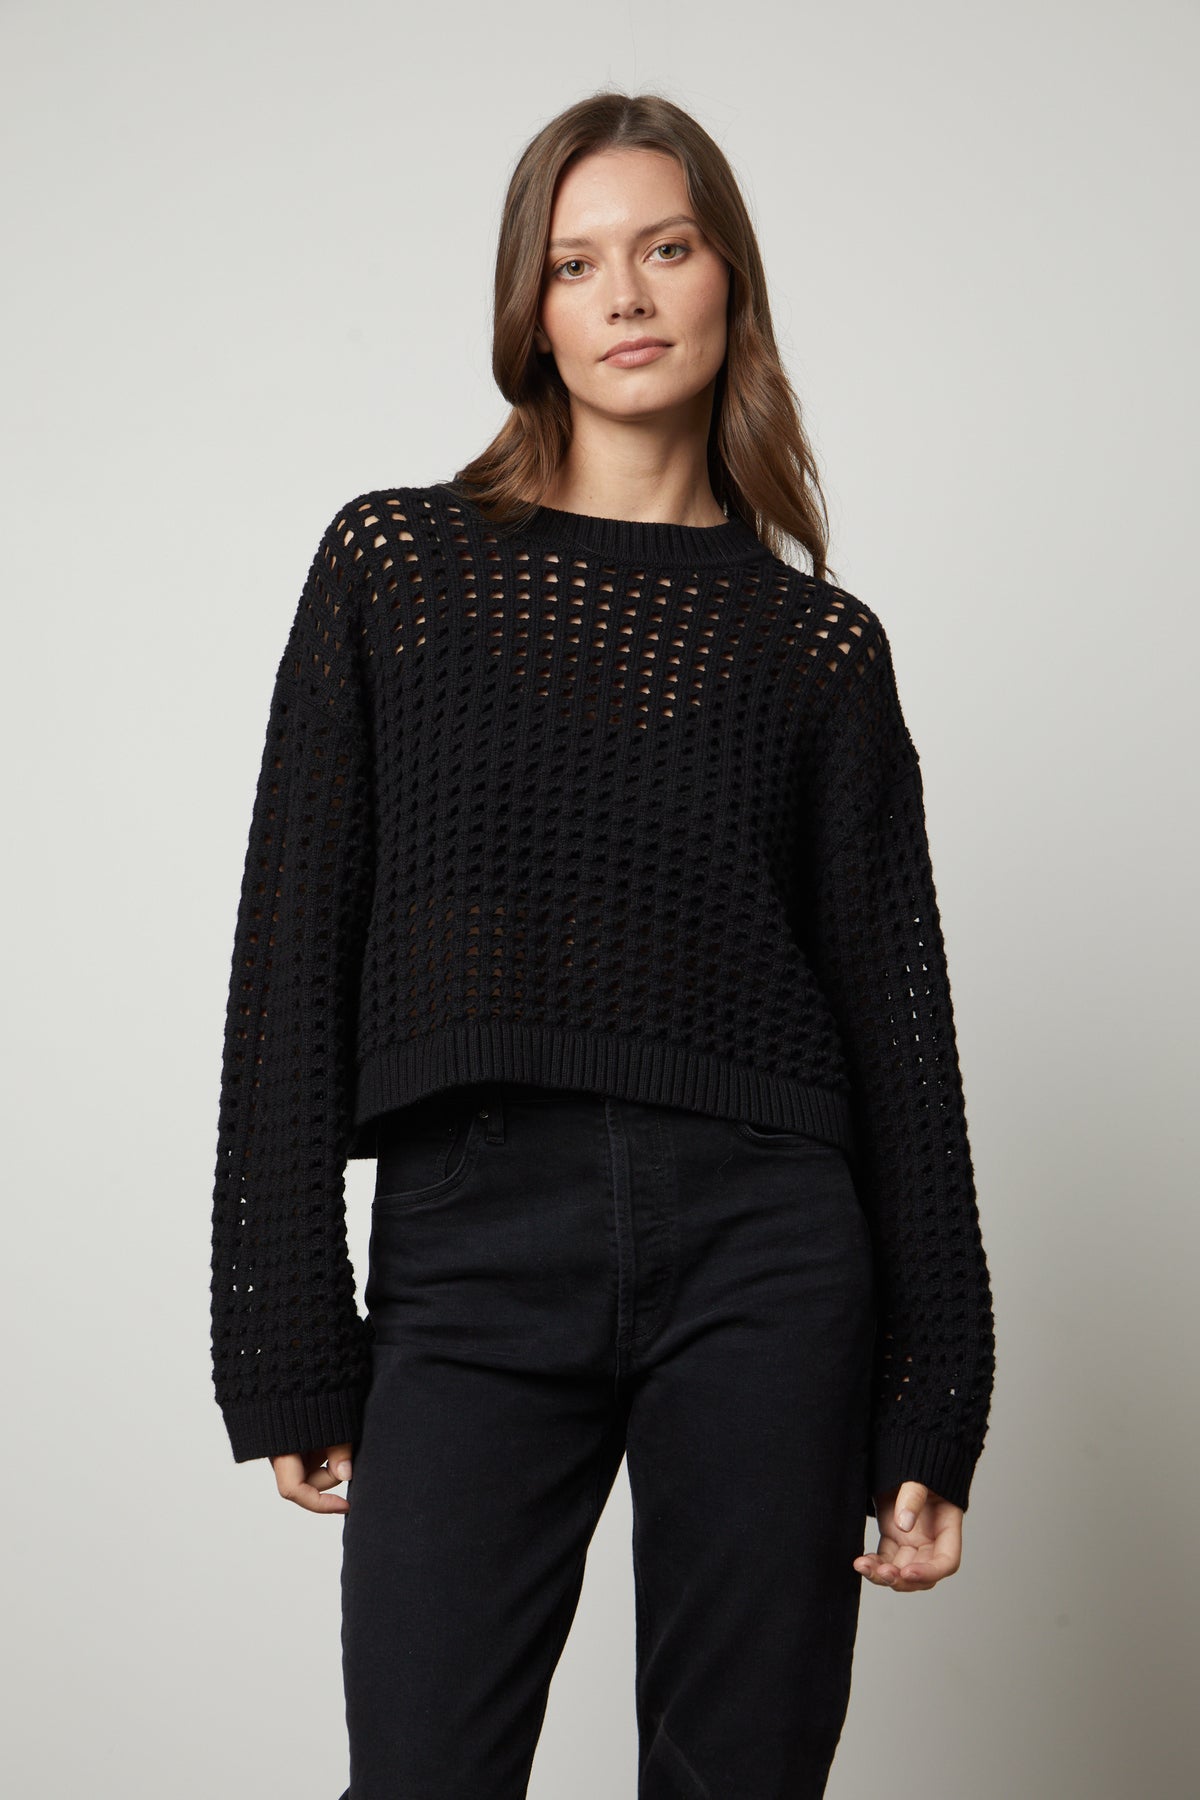 A model wearing a black SAMMIE MESH KNIT CREW NECK SWEATER by Velvet by Graham & Spencer and jeans.-26910428659905